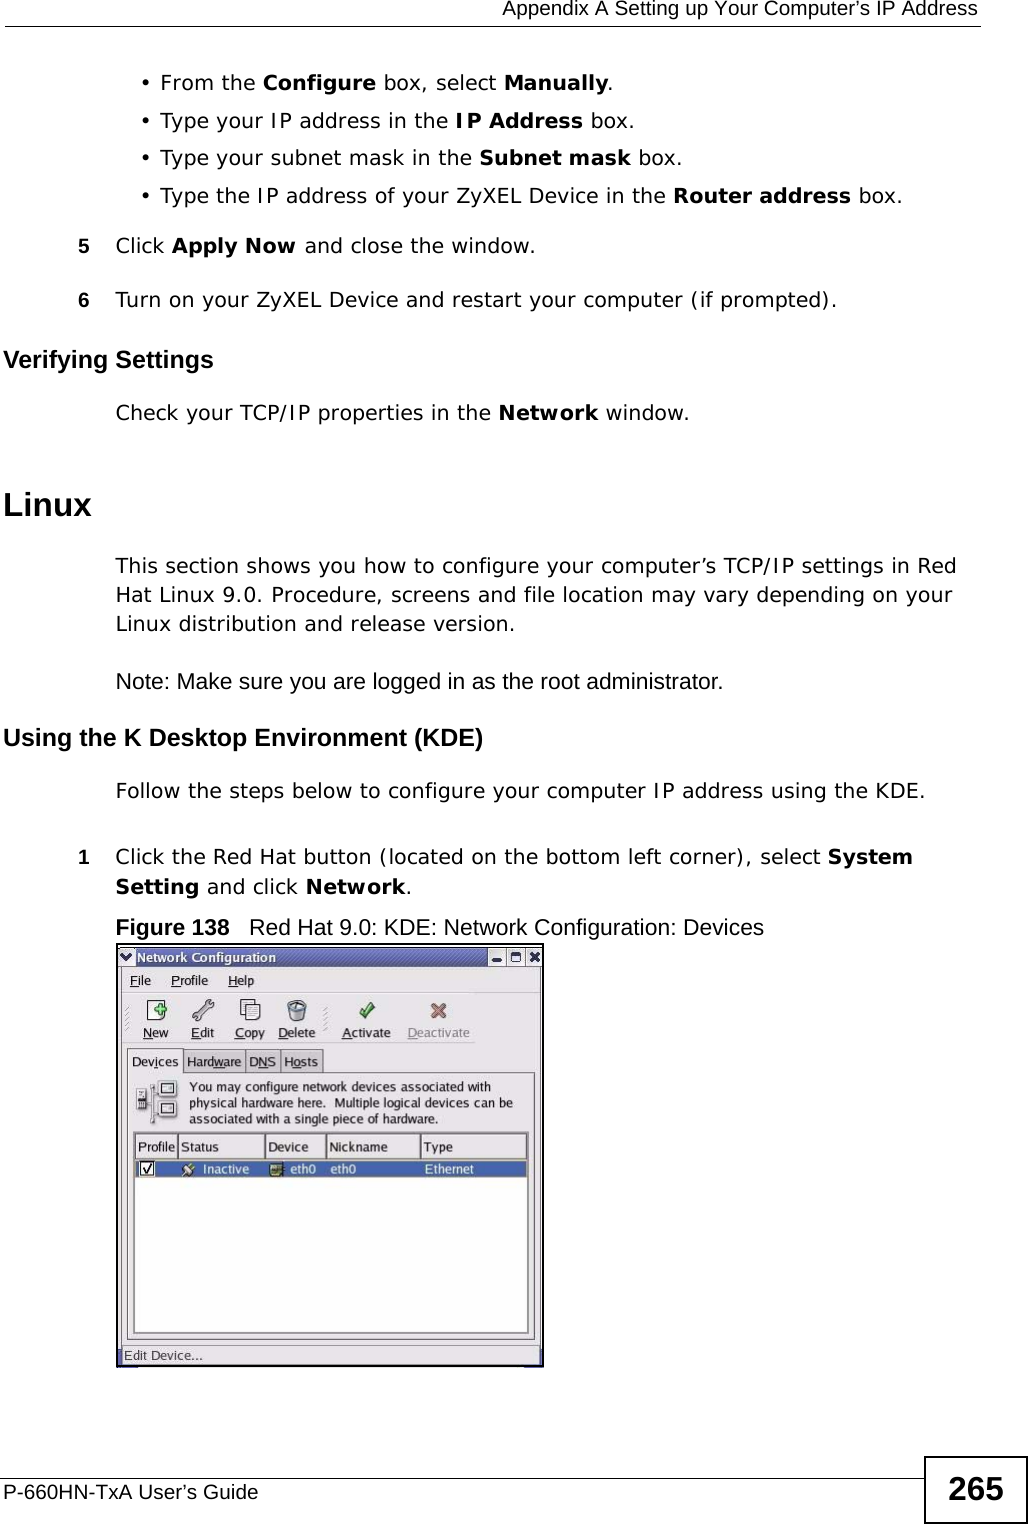  Appendix A Setting up Your Computer’s IP AddressP-660HN-TxA User’s Guide 265•From the Configure box, select Manually.• Type your IP address in the IP Address box.• Type your subnet mask in the Subnet mask box.• Type the IP address of your ZyXEL Device in the Router address box.5Click Apply Now and close the window.6Turn on your ZyXEL Device and restart your computer (if prompted).Verifying SettingsCheck your TCP/IP properties in the Network window.Linux This section shows you how to configure your computer’s TCP/IP settings in Red Hat Linux 9.0. Procedure, screens and file location may vary depending on your Linux distribution and release version. Note: Make sure you are logged in as the root administrator. Using the K Desktop Environment (KDE)Follow the steps below to configure your computer IP address using the KDE. 1Click the Red Hat button (located on the bottom left corner), select System Setting and click Network.Figure 138   Red Hat 9.0: KDE: Network Configuration: Devices 